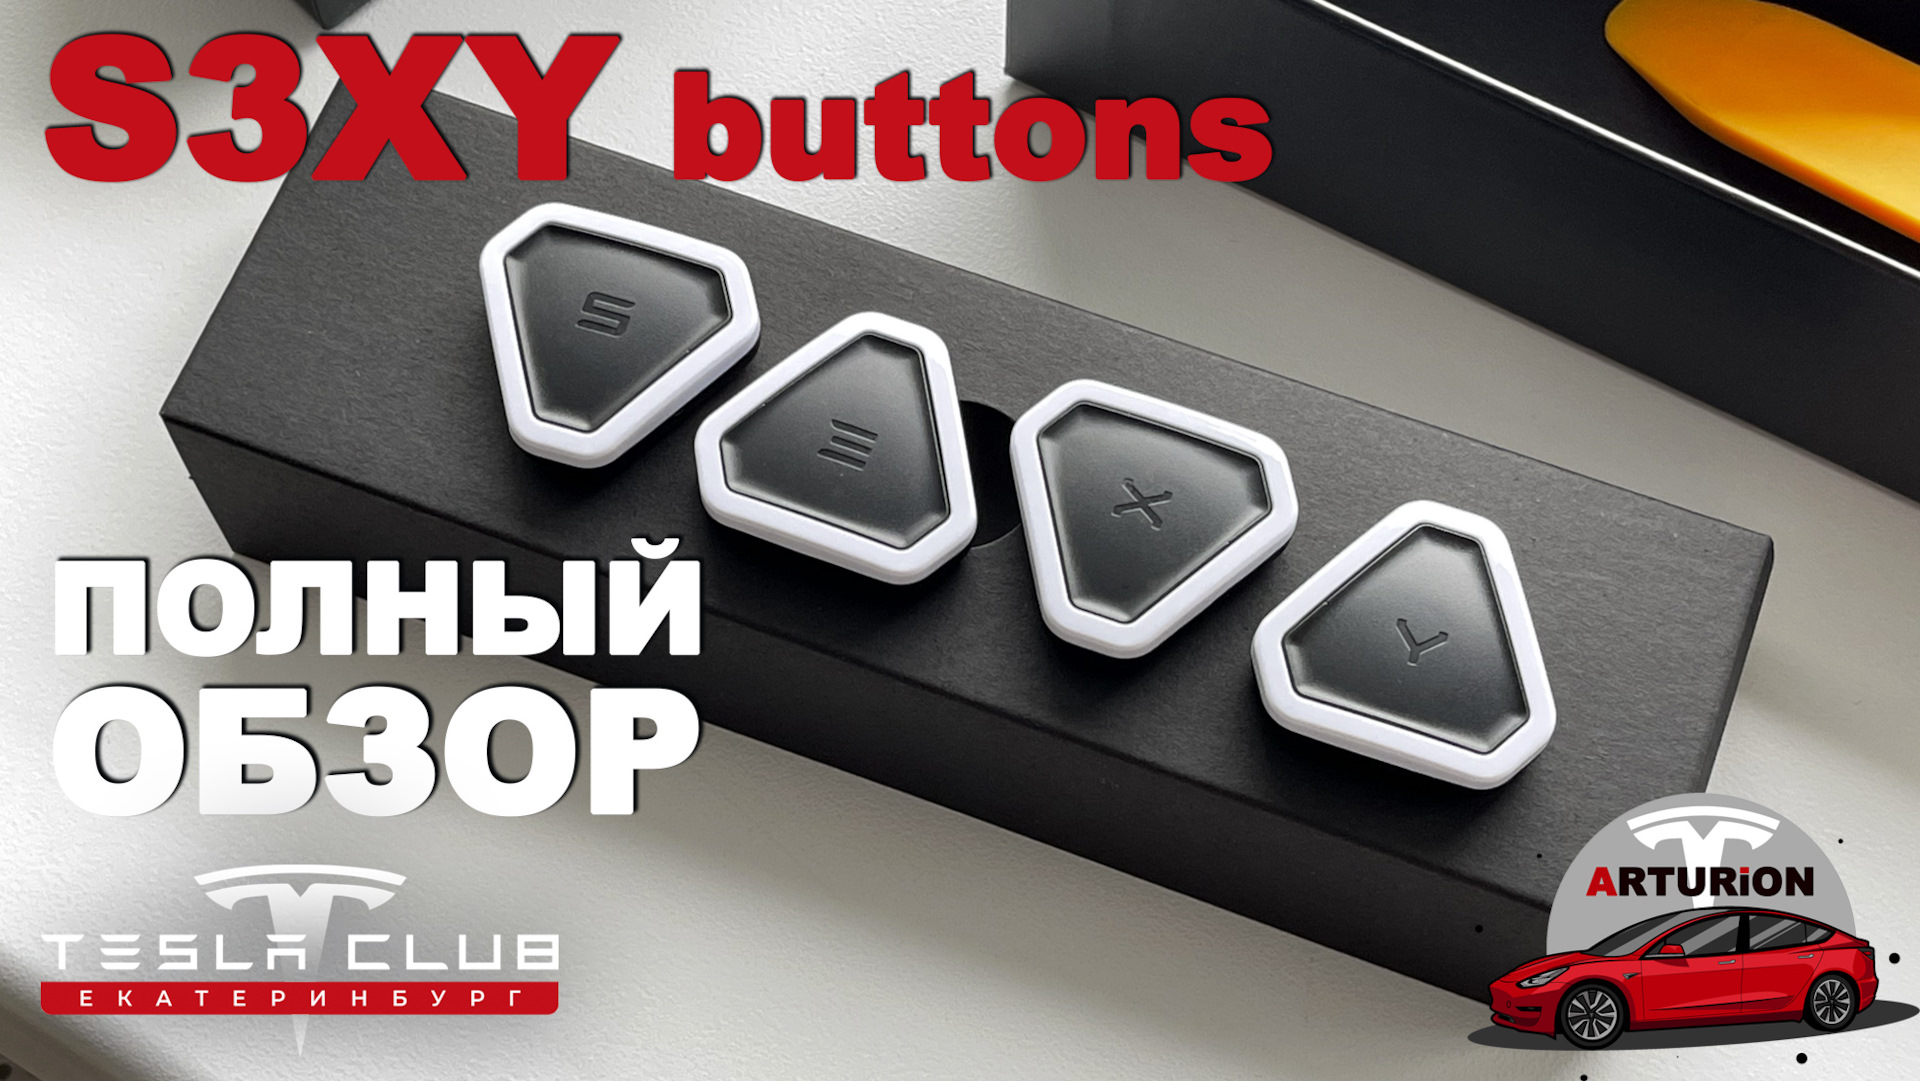 S3xy buttons app